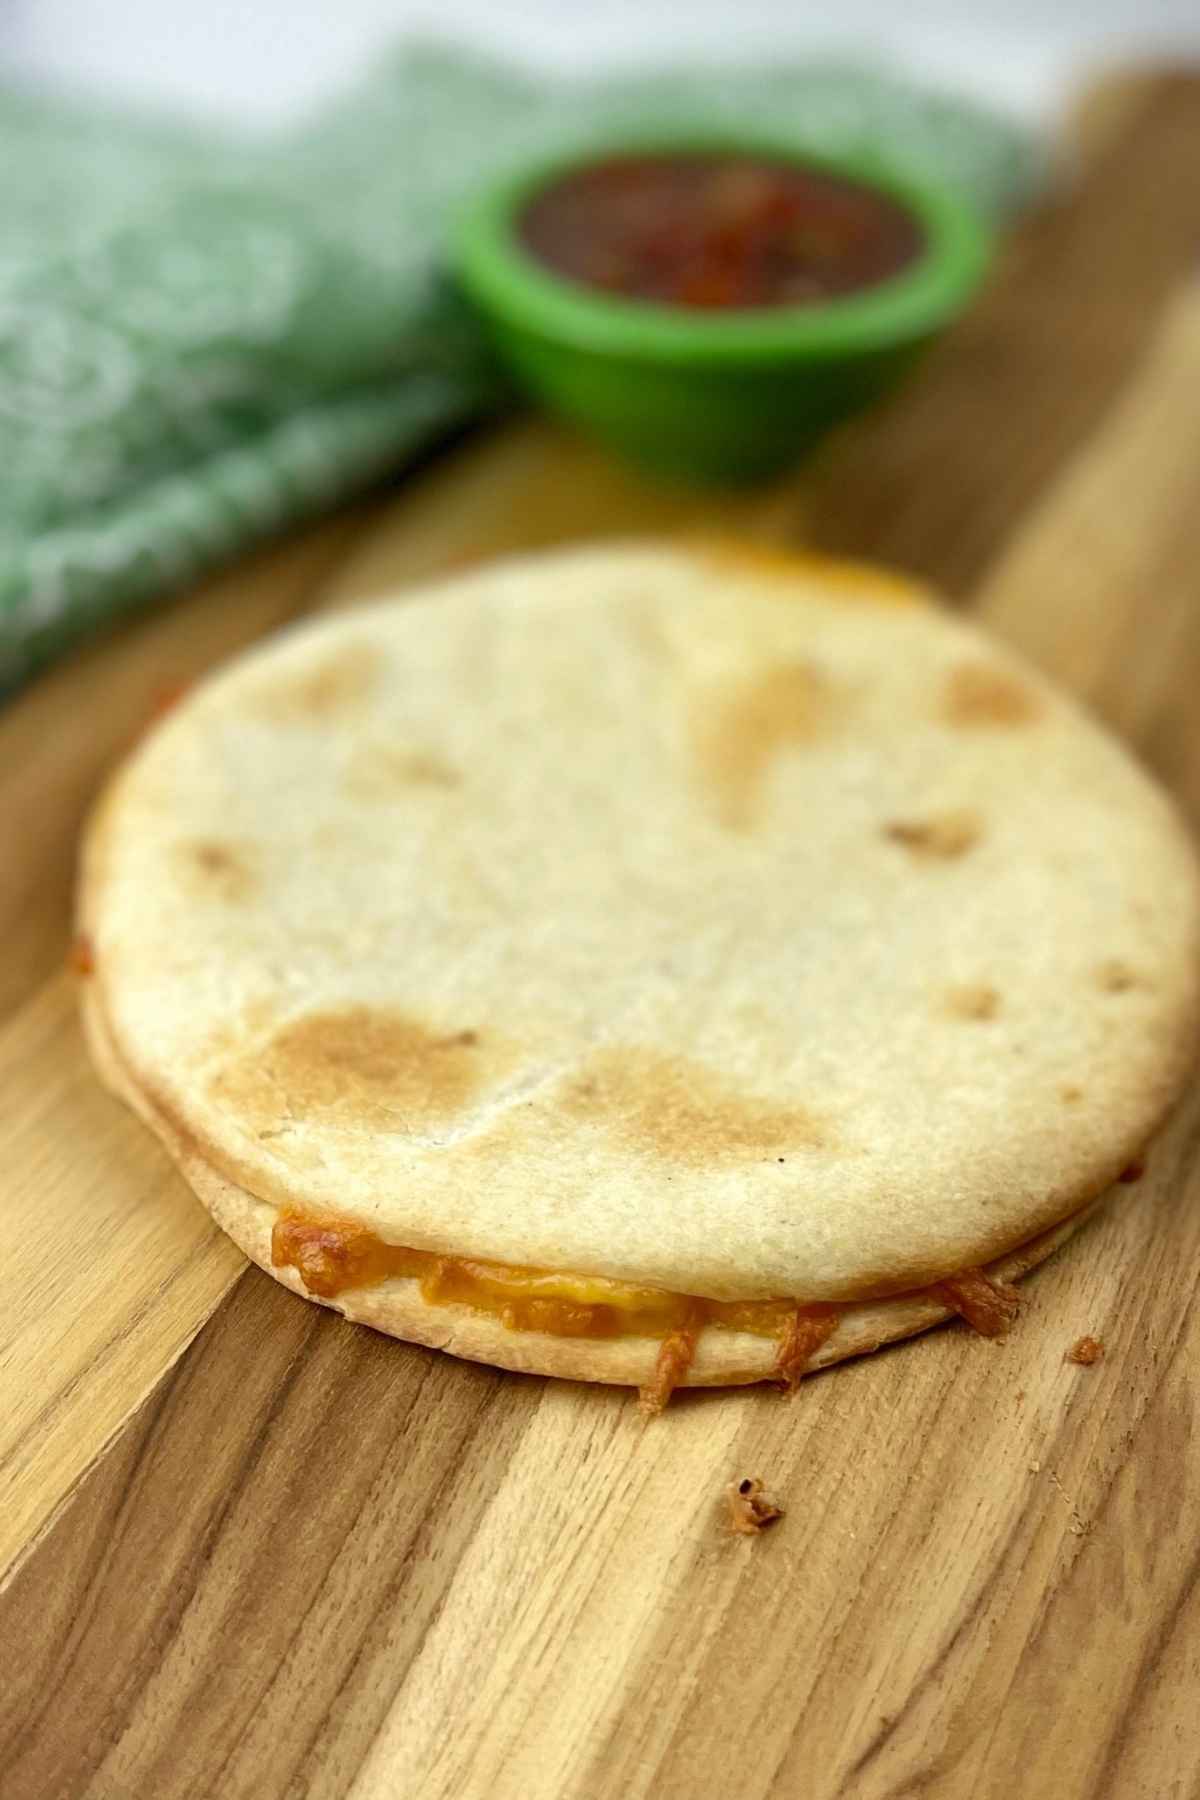 Uncut air fryer quesadilla with salsa in the background.s